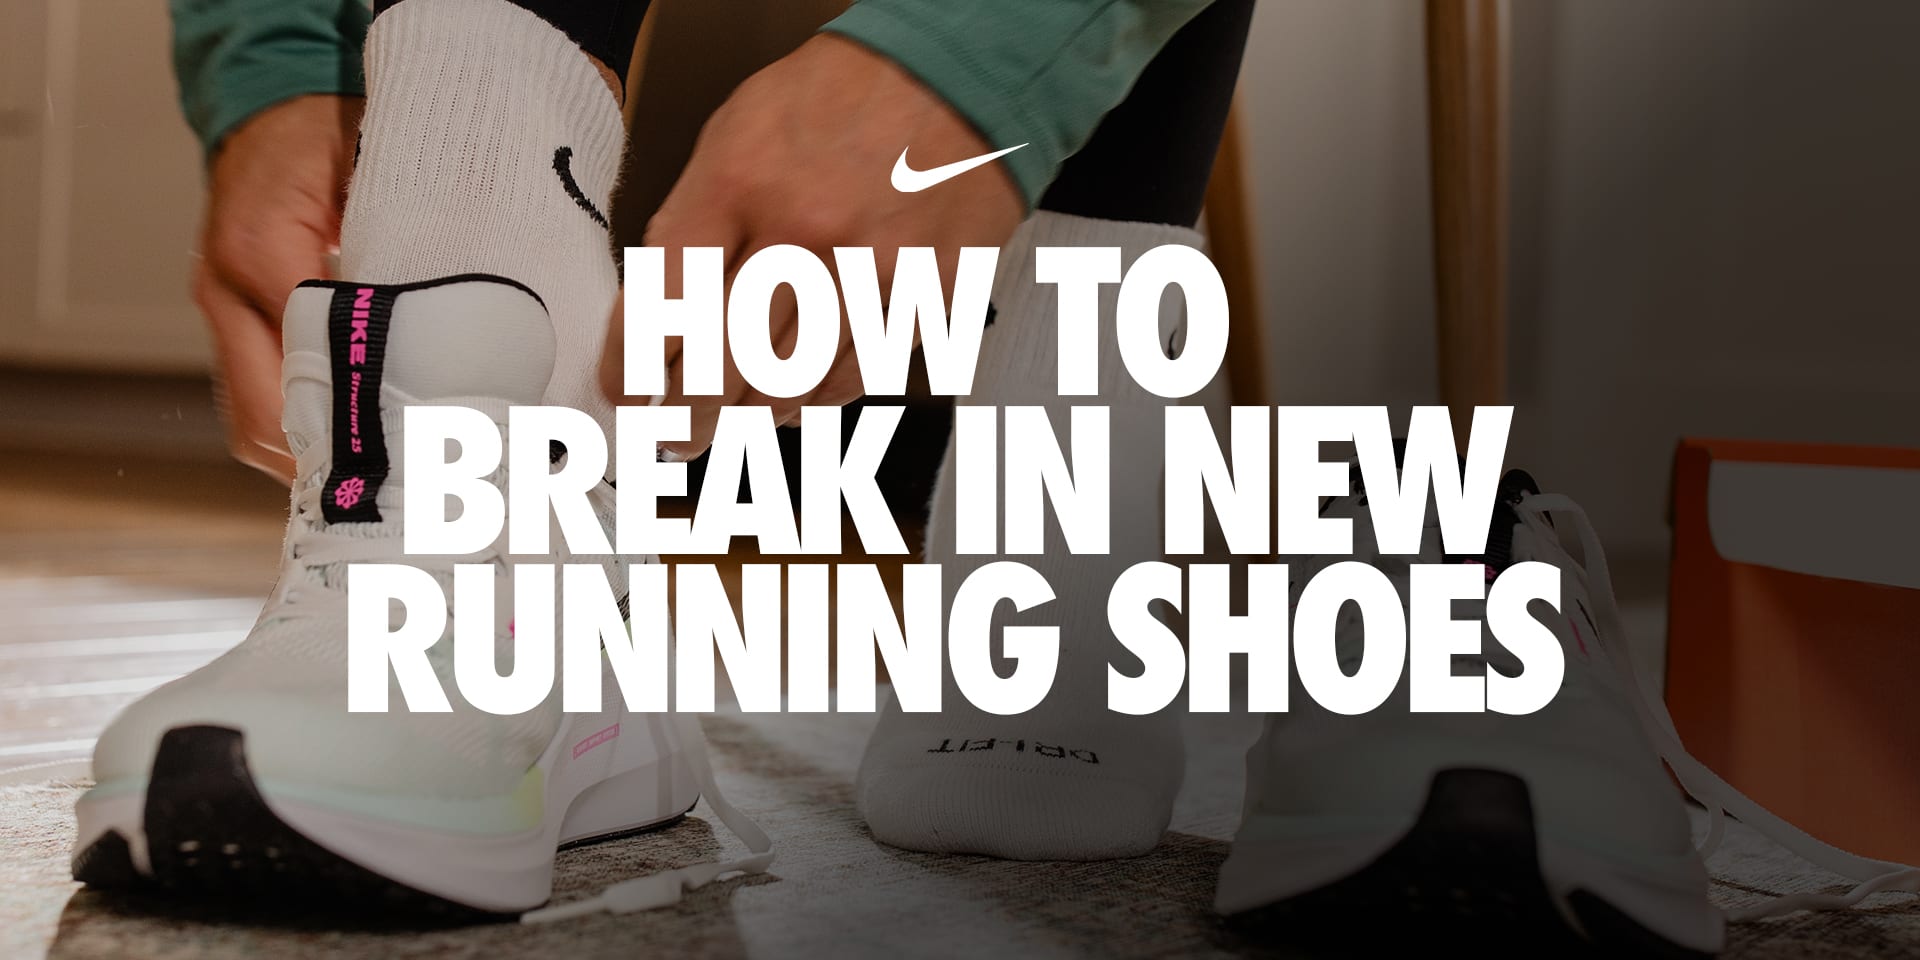 How To Break in New Running Shoes